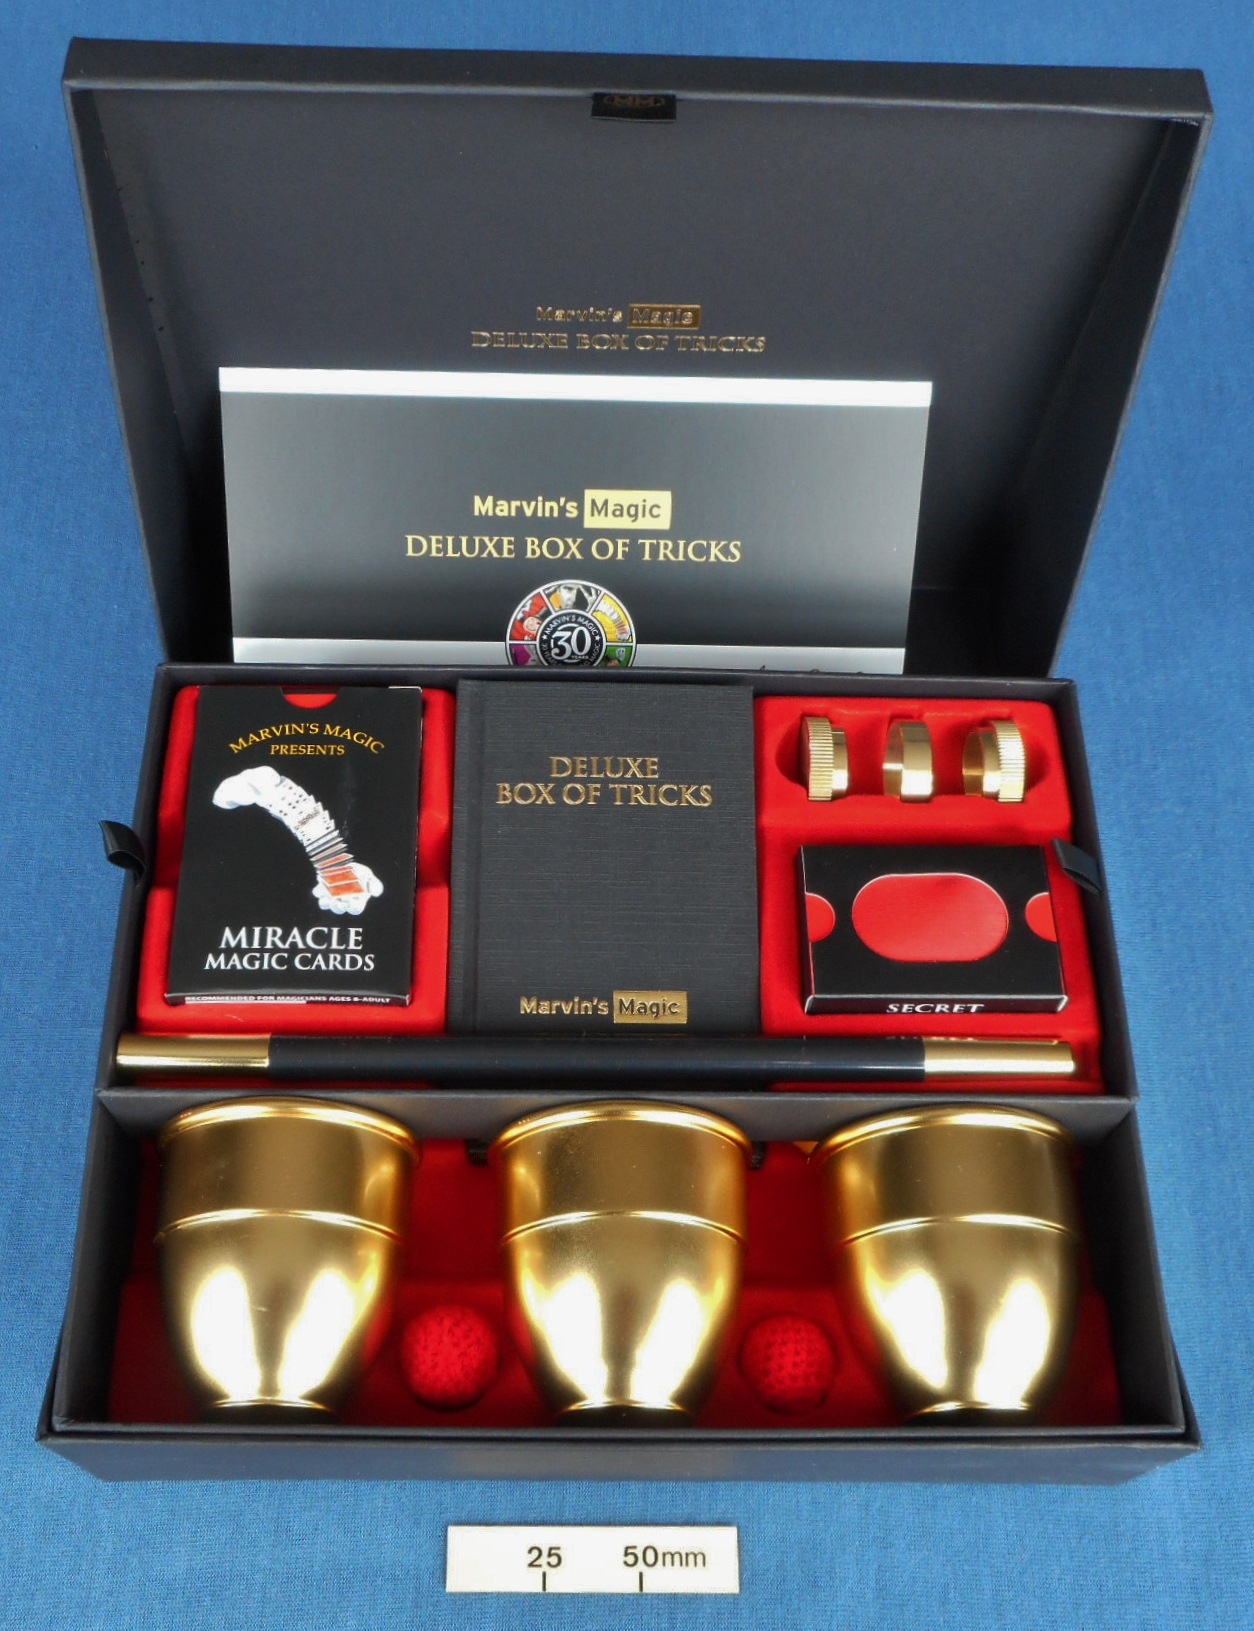 Marvin’s Magic Deluxe Box of Tricks